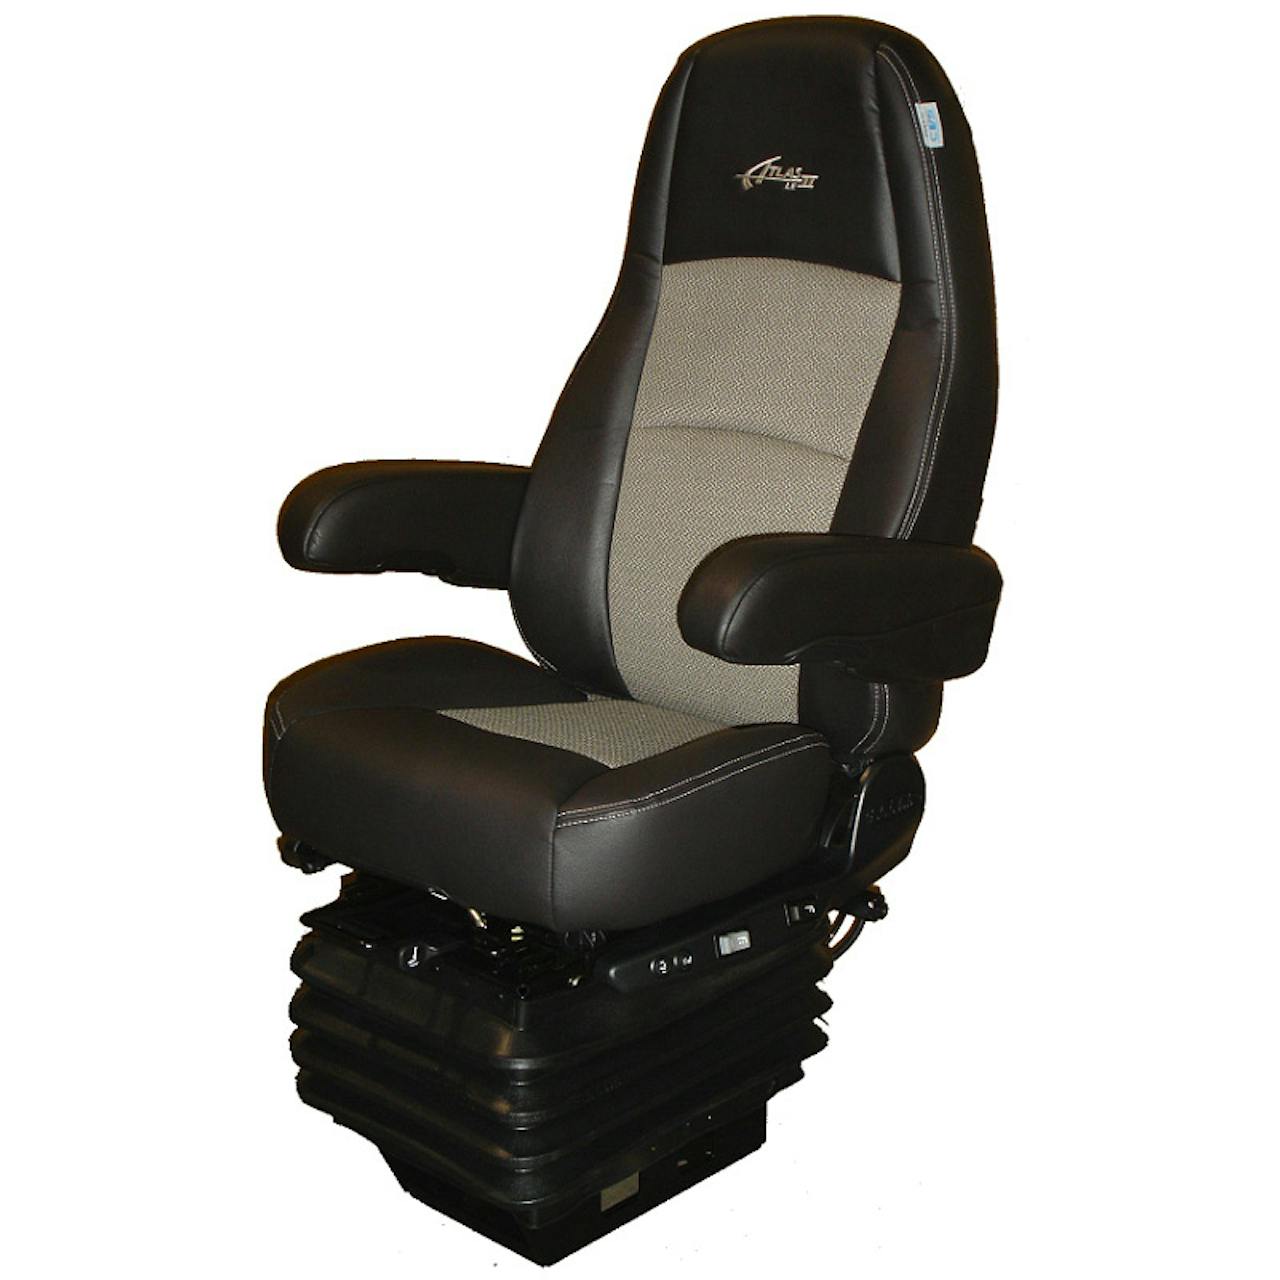 https://raneys-cdn11.imgix.net/images/stencil/original/products/191291/81543/Sears_Premium_Atlas_II_LE_Seat_Heated_Cooling_Black_Wheat_Leather_2D914NEBBNSN__80182.1401981792.jpg?auto=compress,format&w=1280